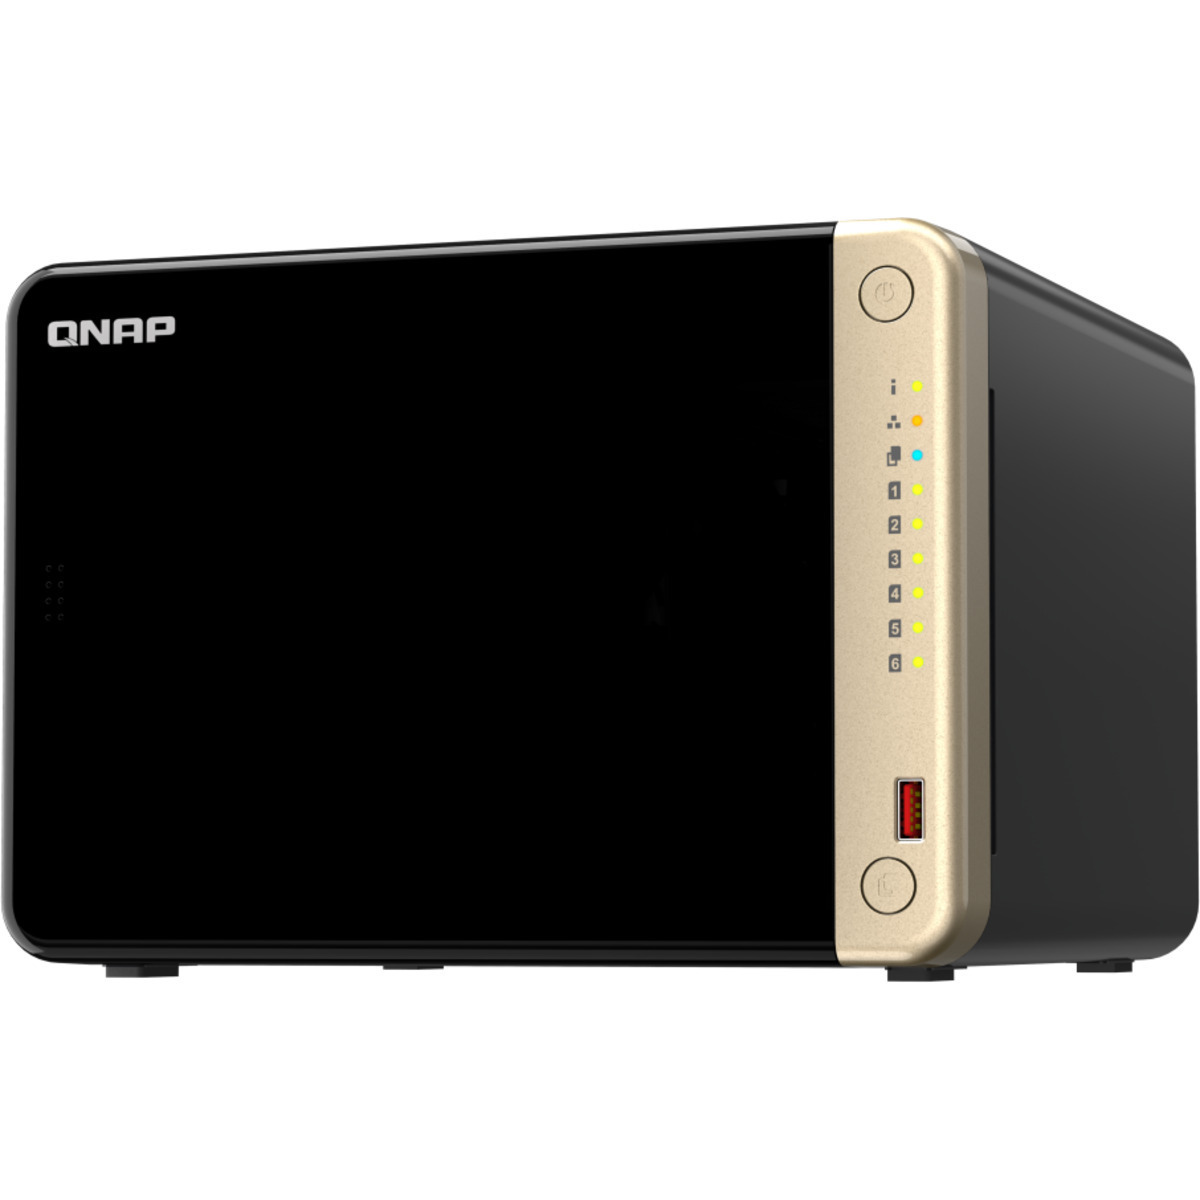 QNAP TS-664 12tb 6-Bay Desktop Multimedia / Power User / Business NAS - Network Attached Storage Device 3x4tb Seagate EXOS 7E10 ST4000NM024B 3.5 7200rpm SATA 6Gb/s HDD ENTERPRISE Class Drives Installed - Burn-In Tested TS-664